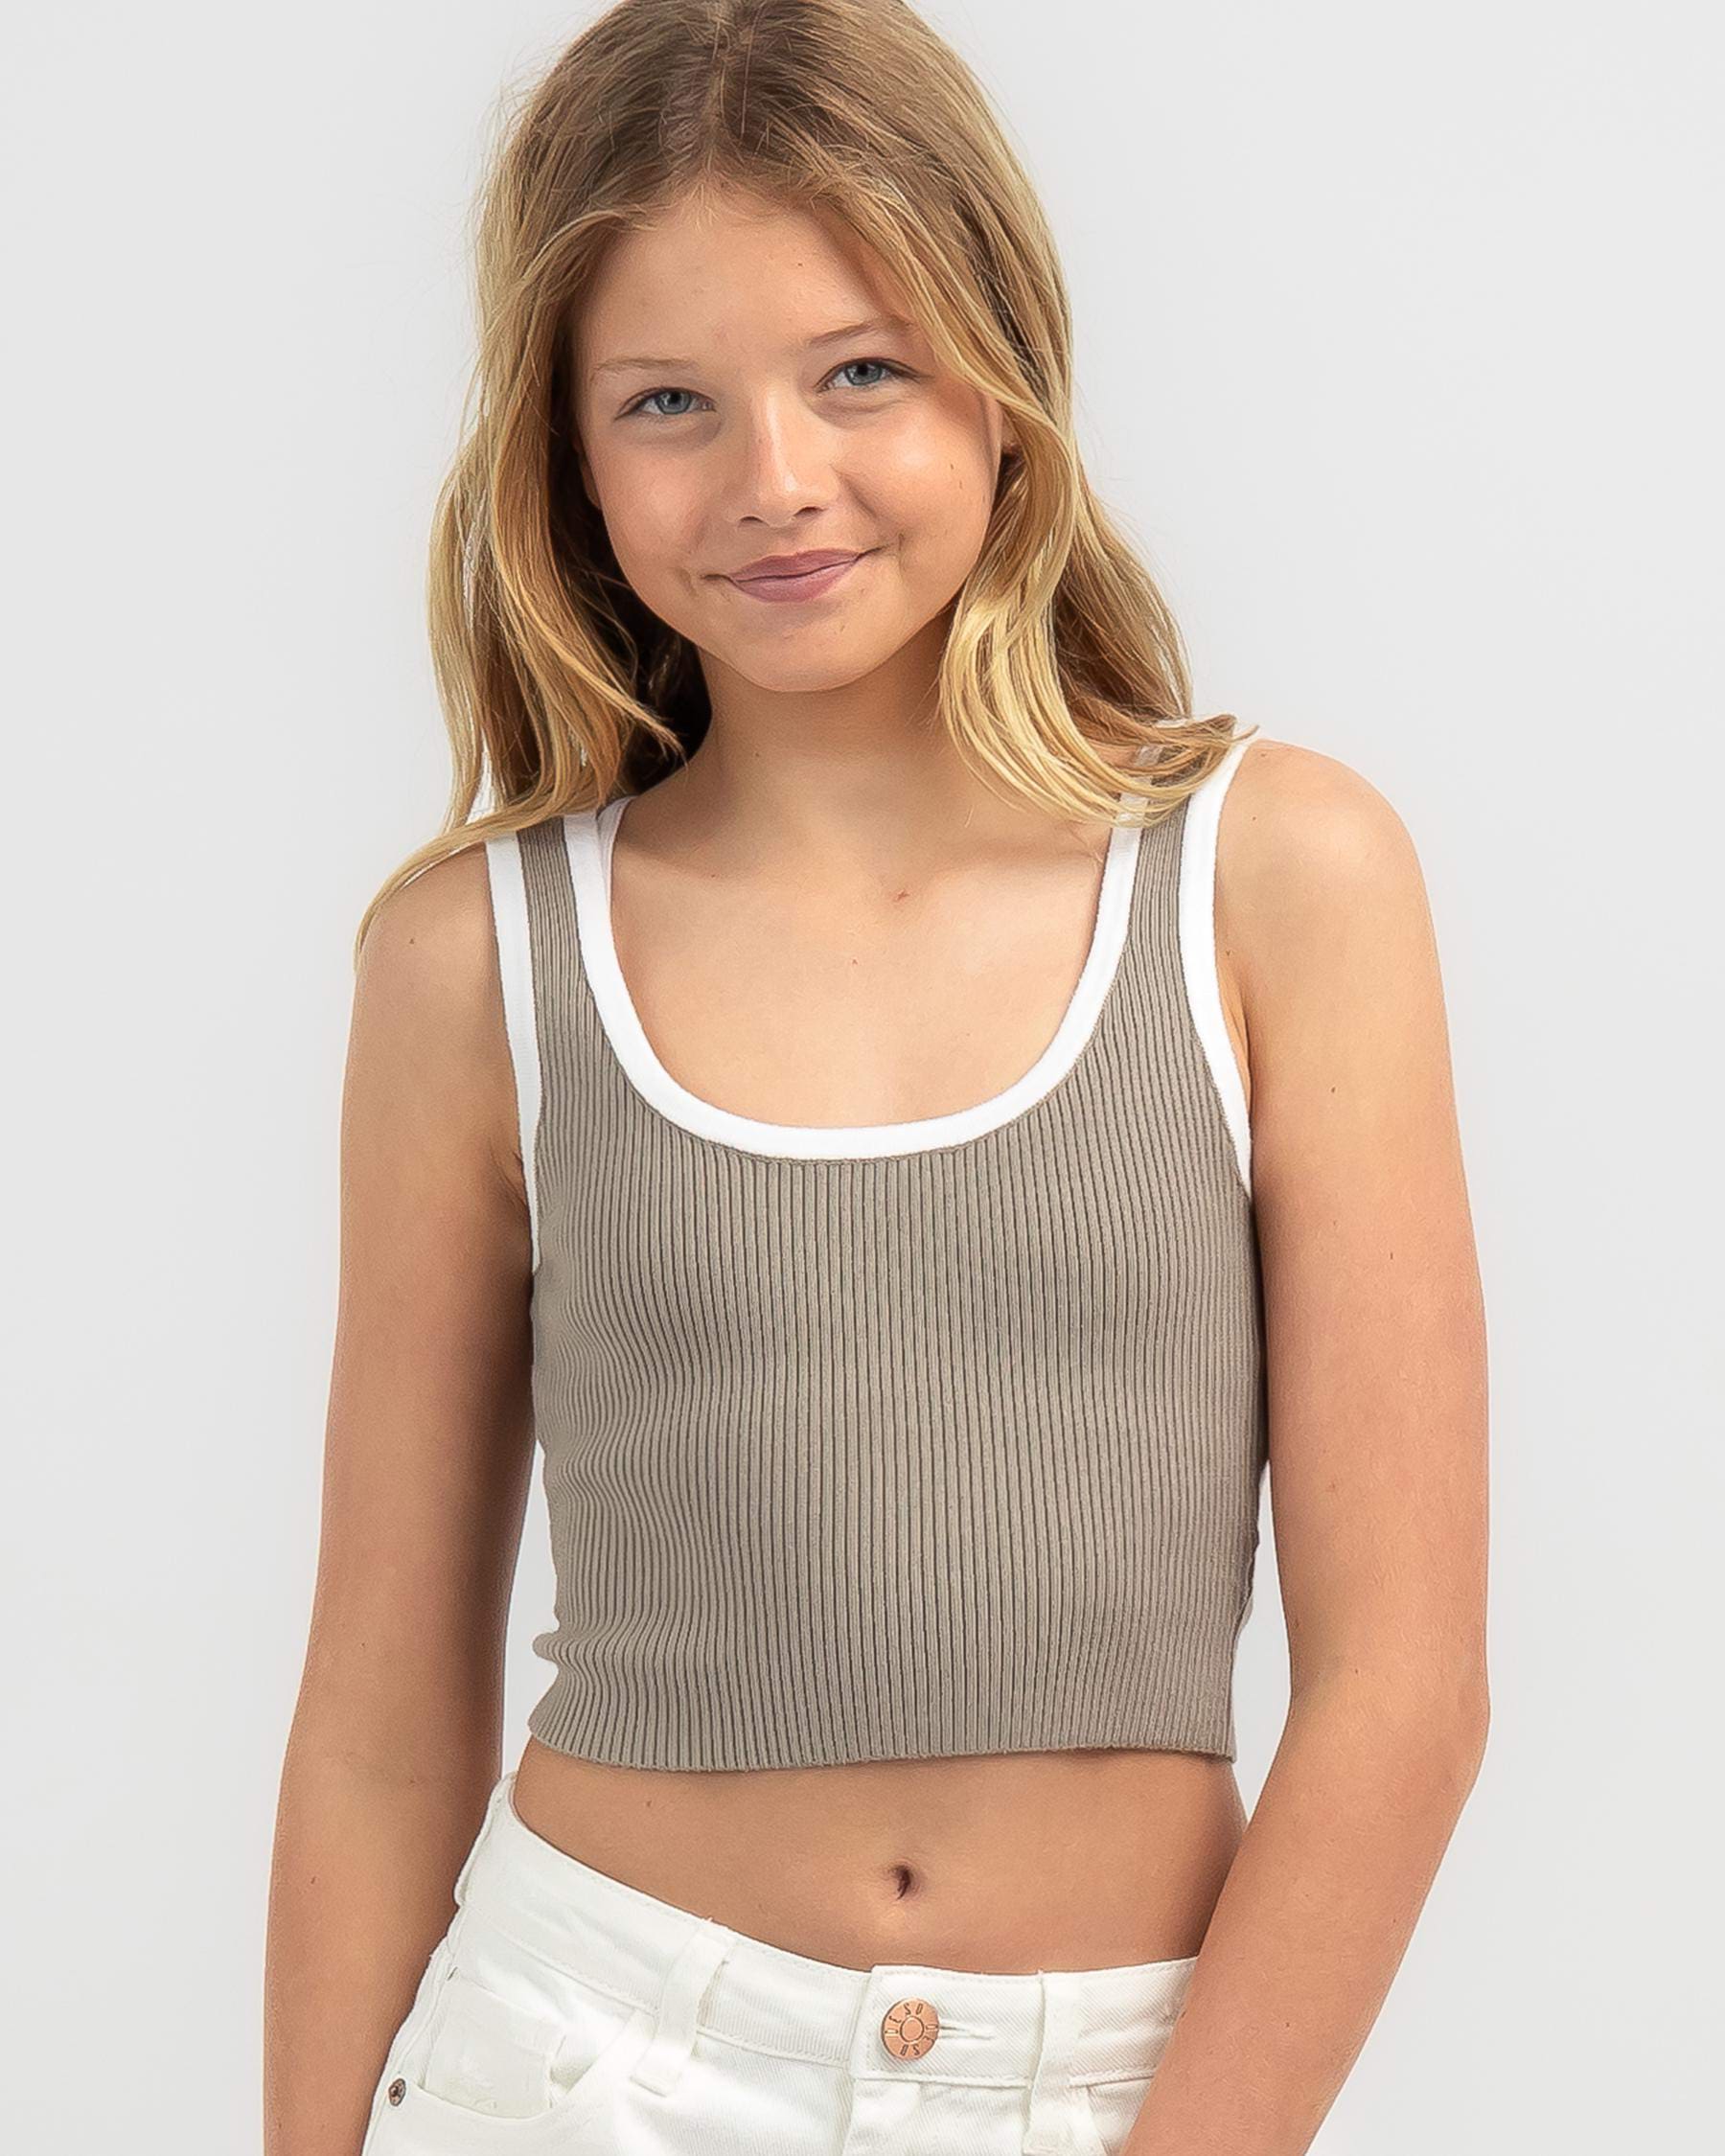 Mooloola Girls' Basic Knit Top In Taupe/white - FREE* Shipping & Easy ...